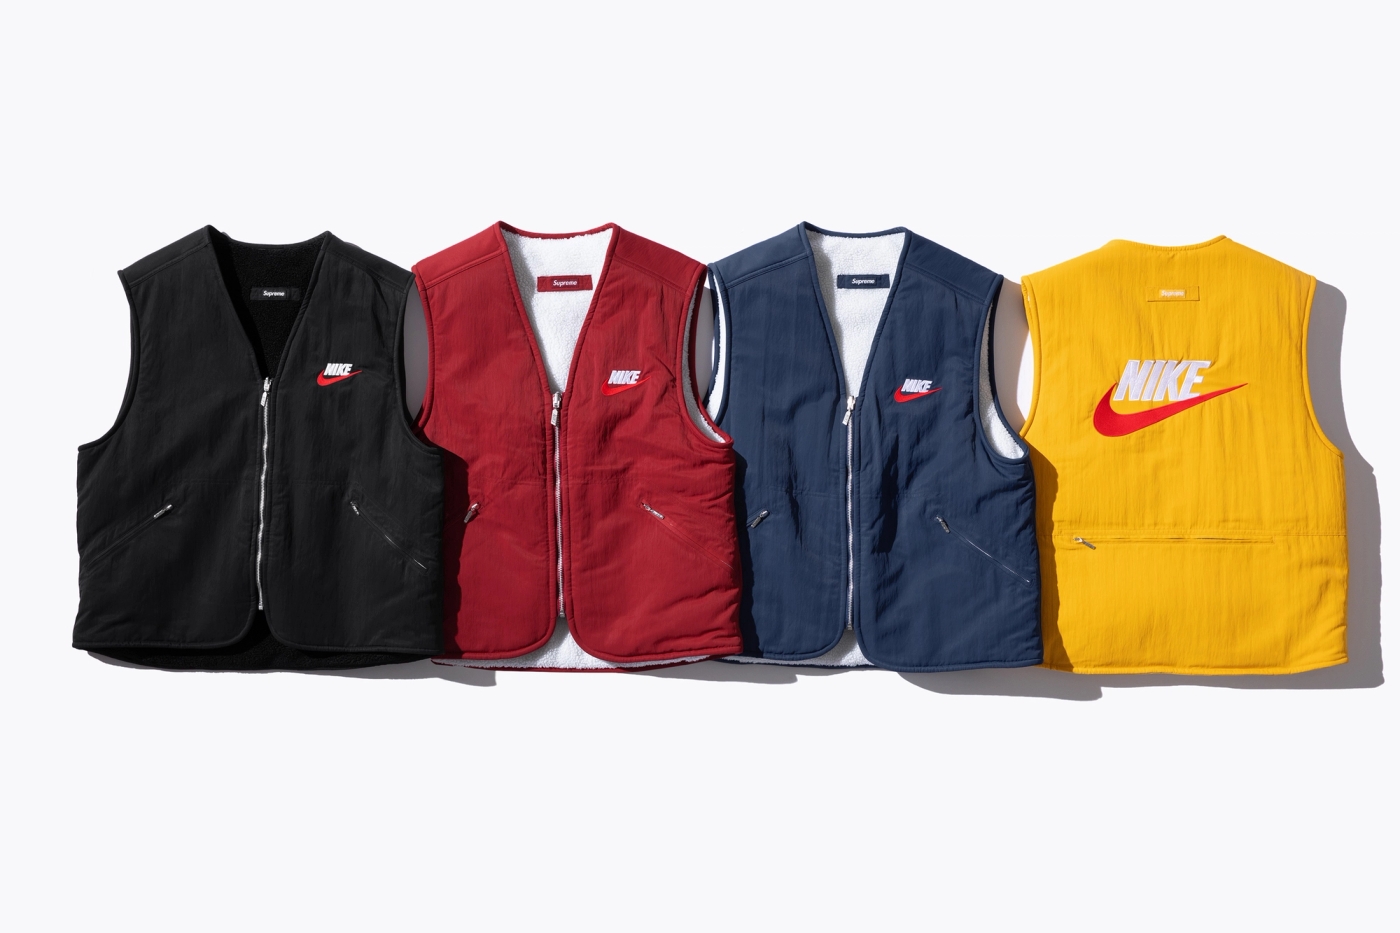 Reversible Nylon Vest with sherpa fleece lining and embroidered logos. (23/38)